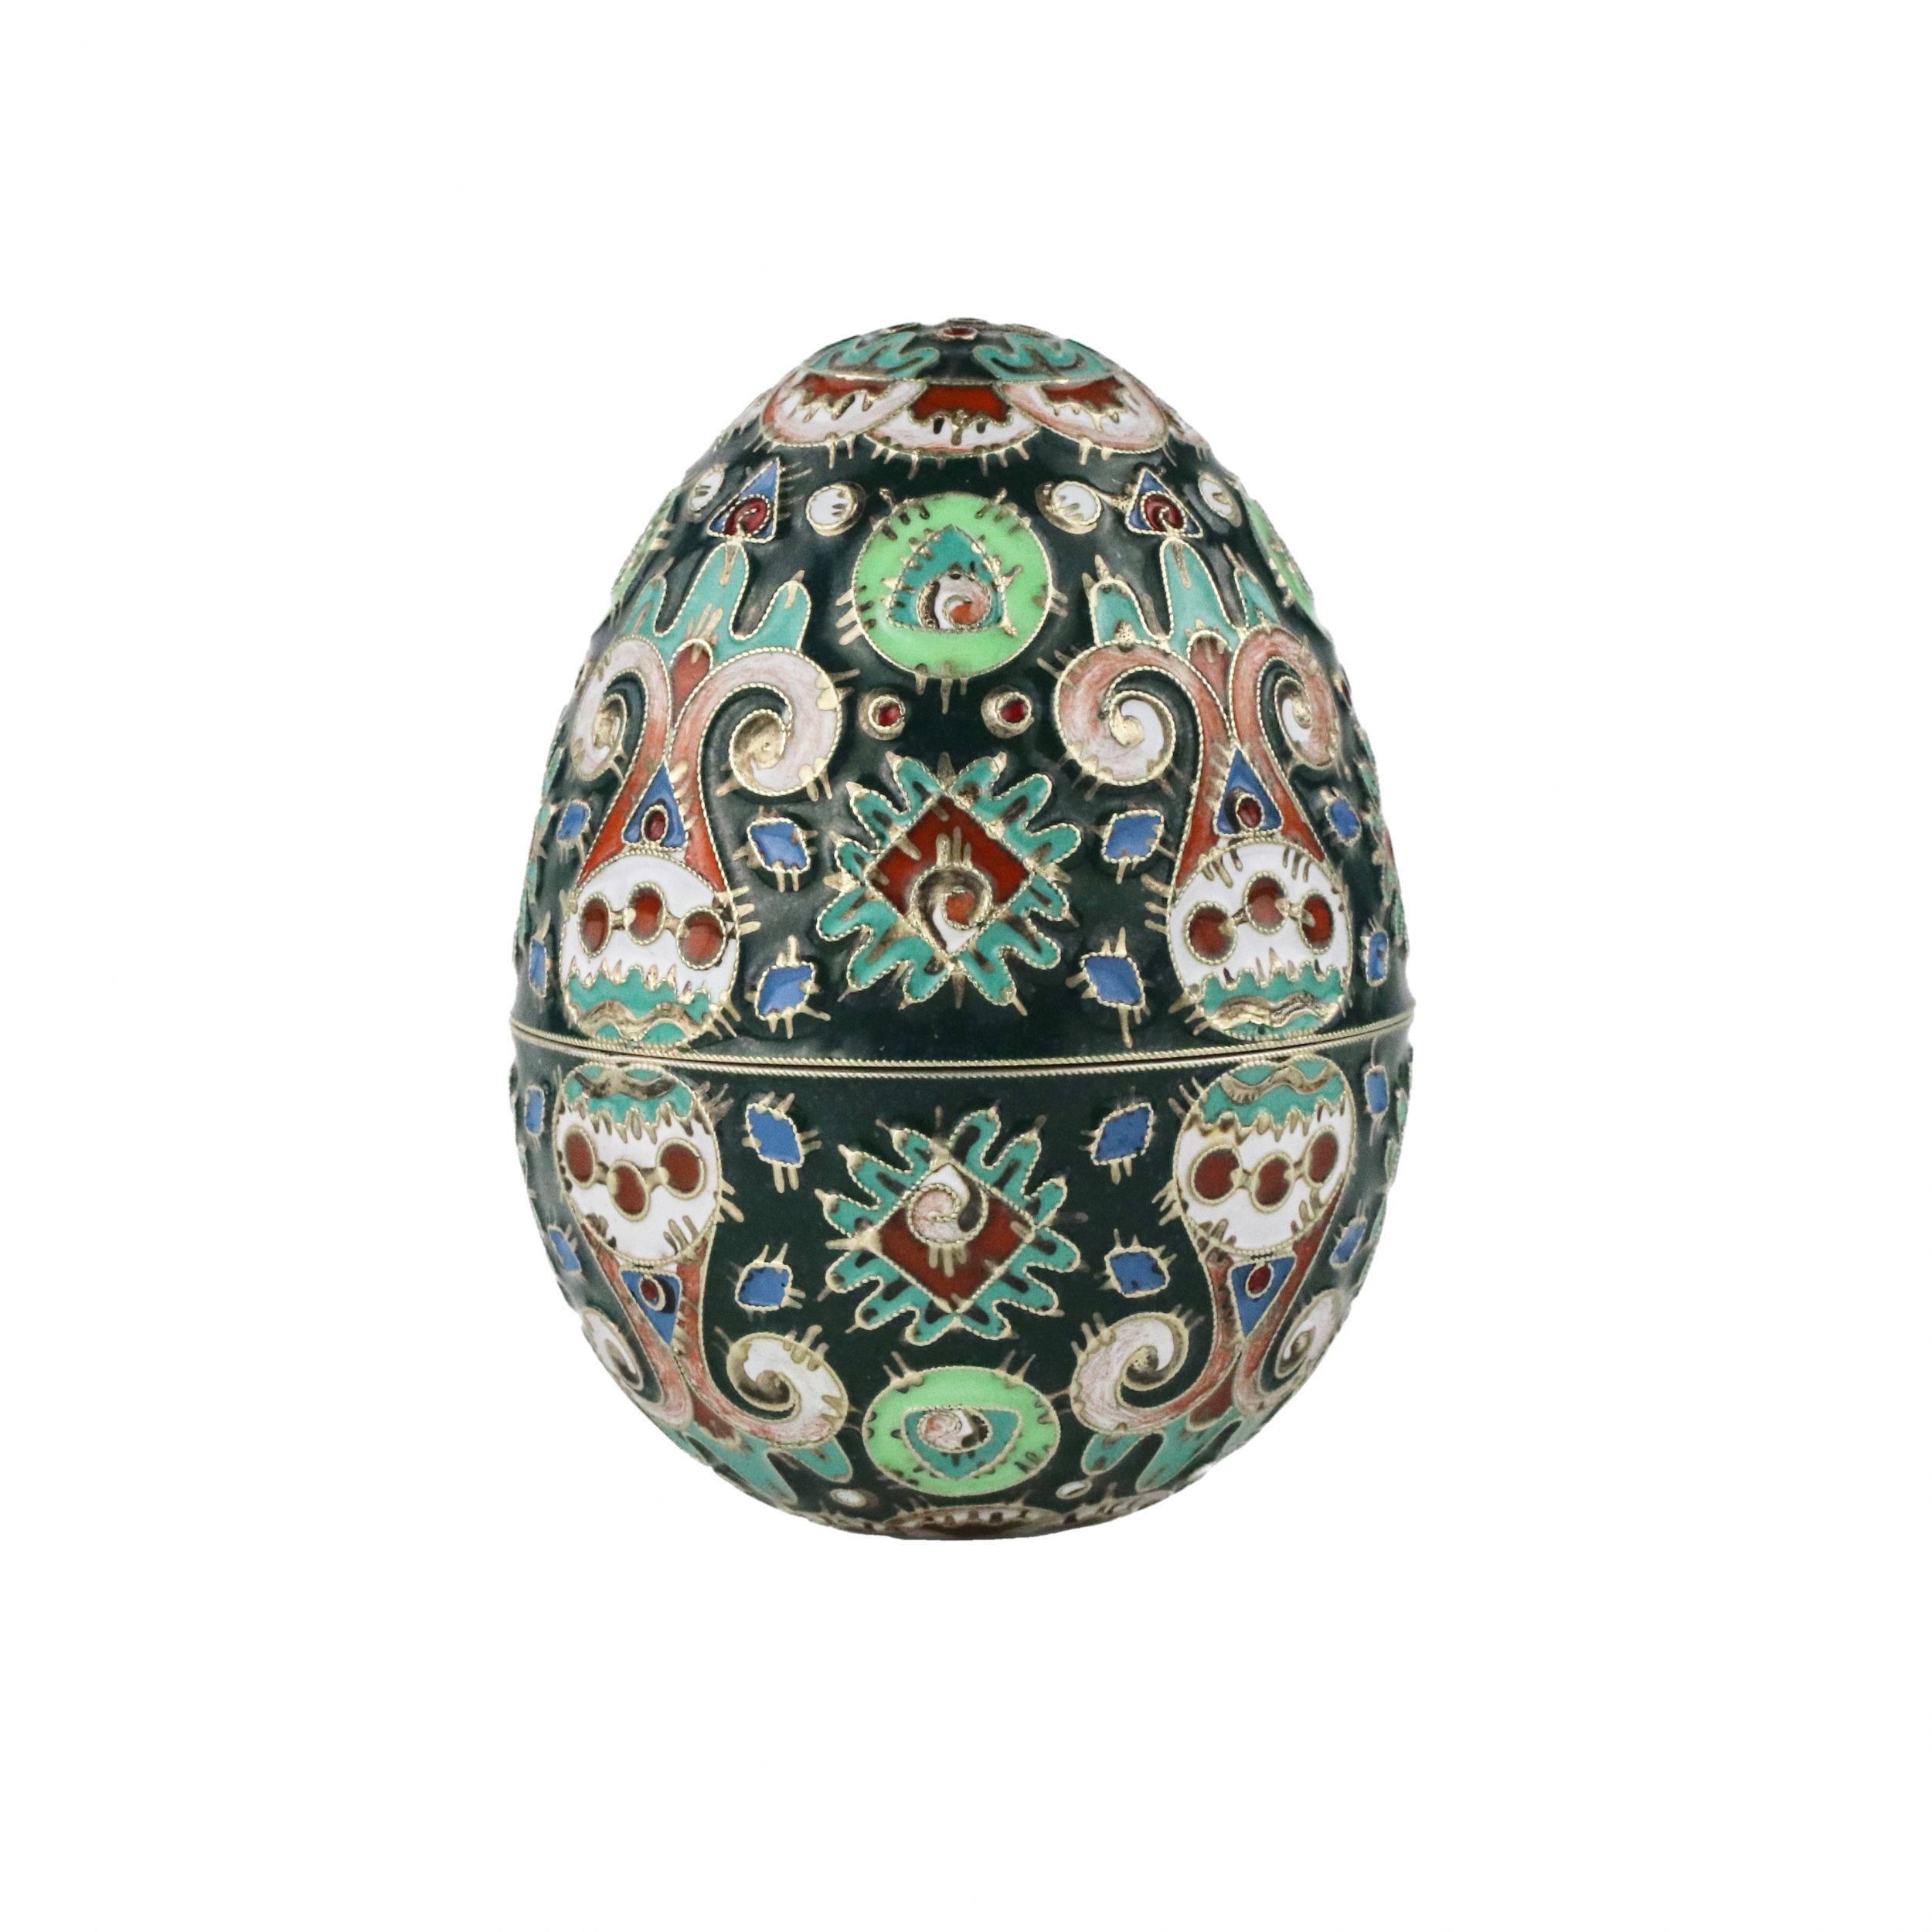 Two-part-decorative-silver-Easter-egg-with-cloisonne-enamel-